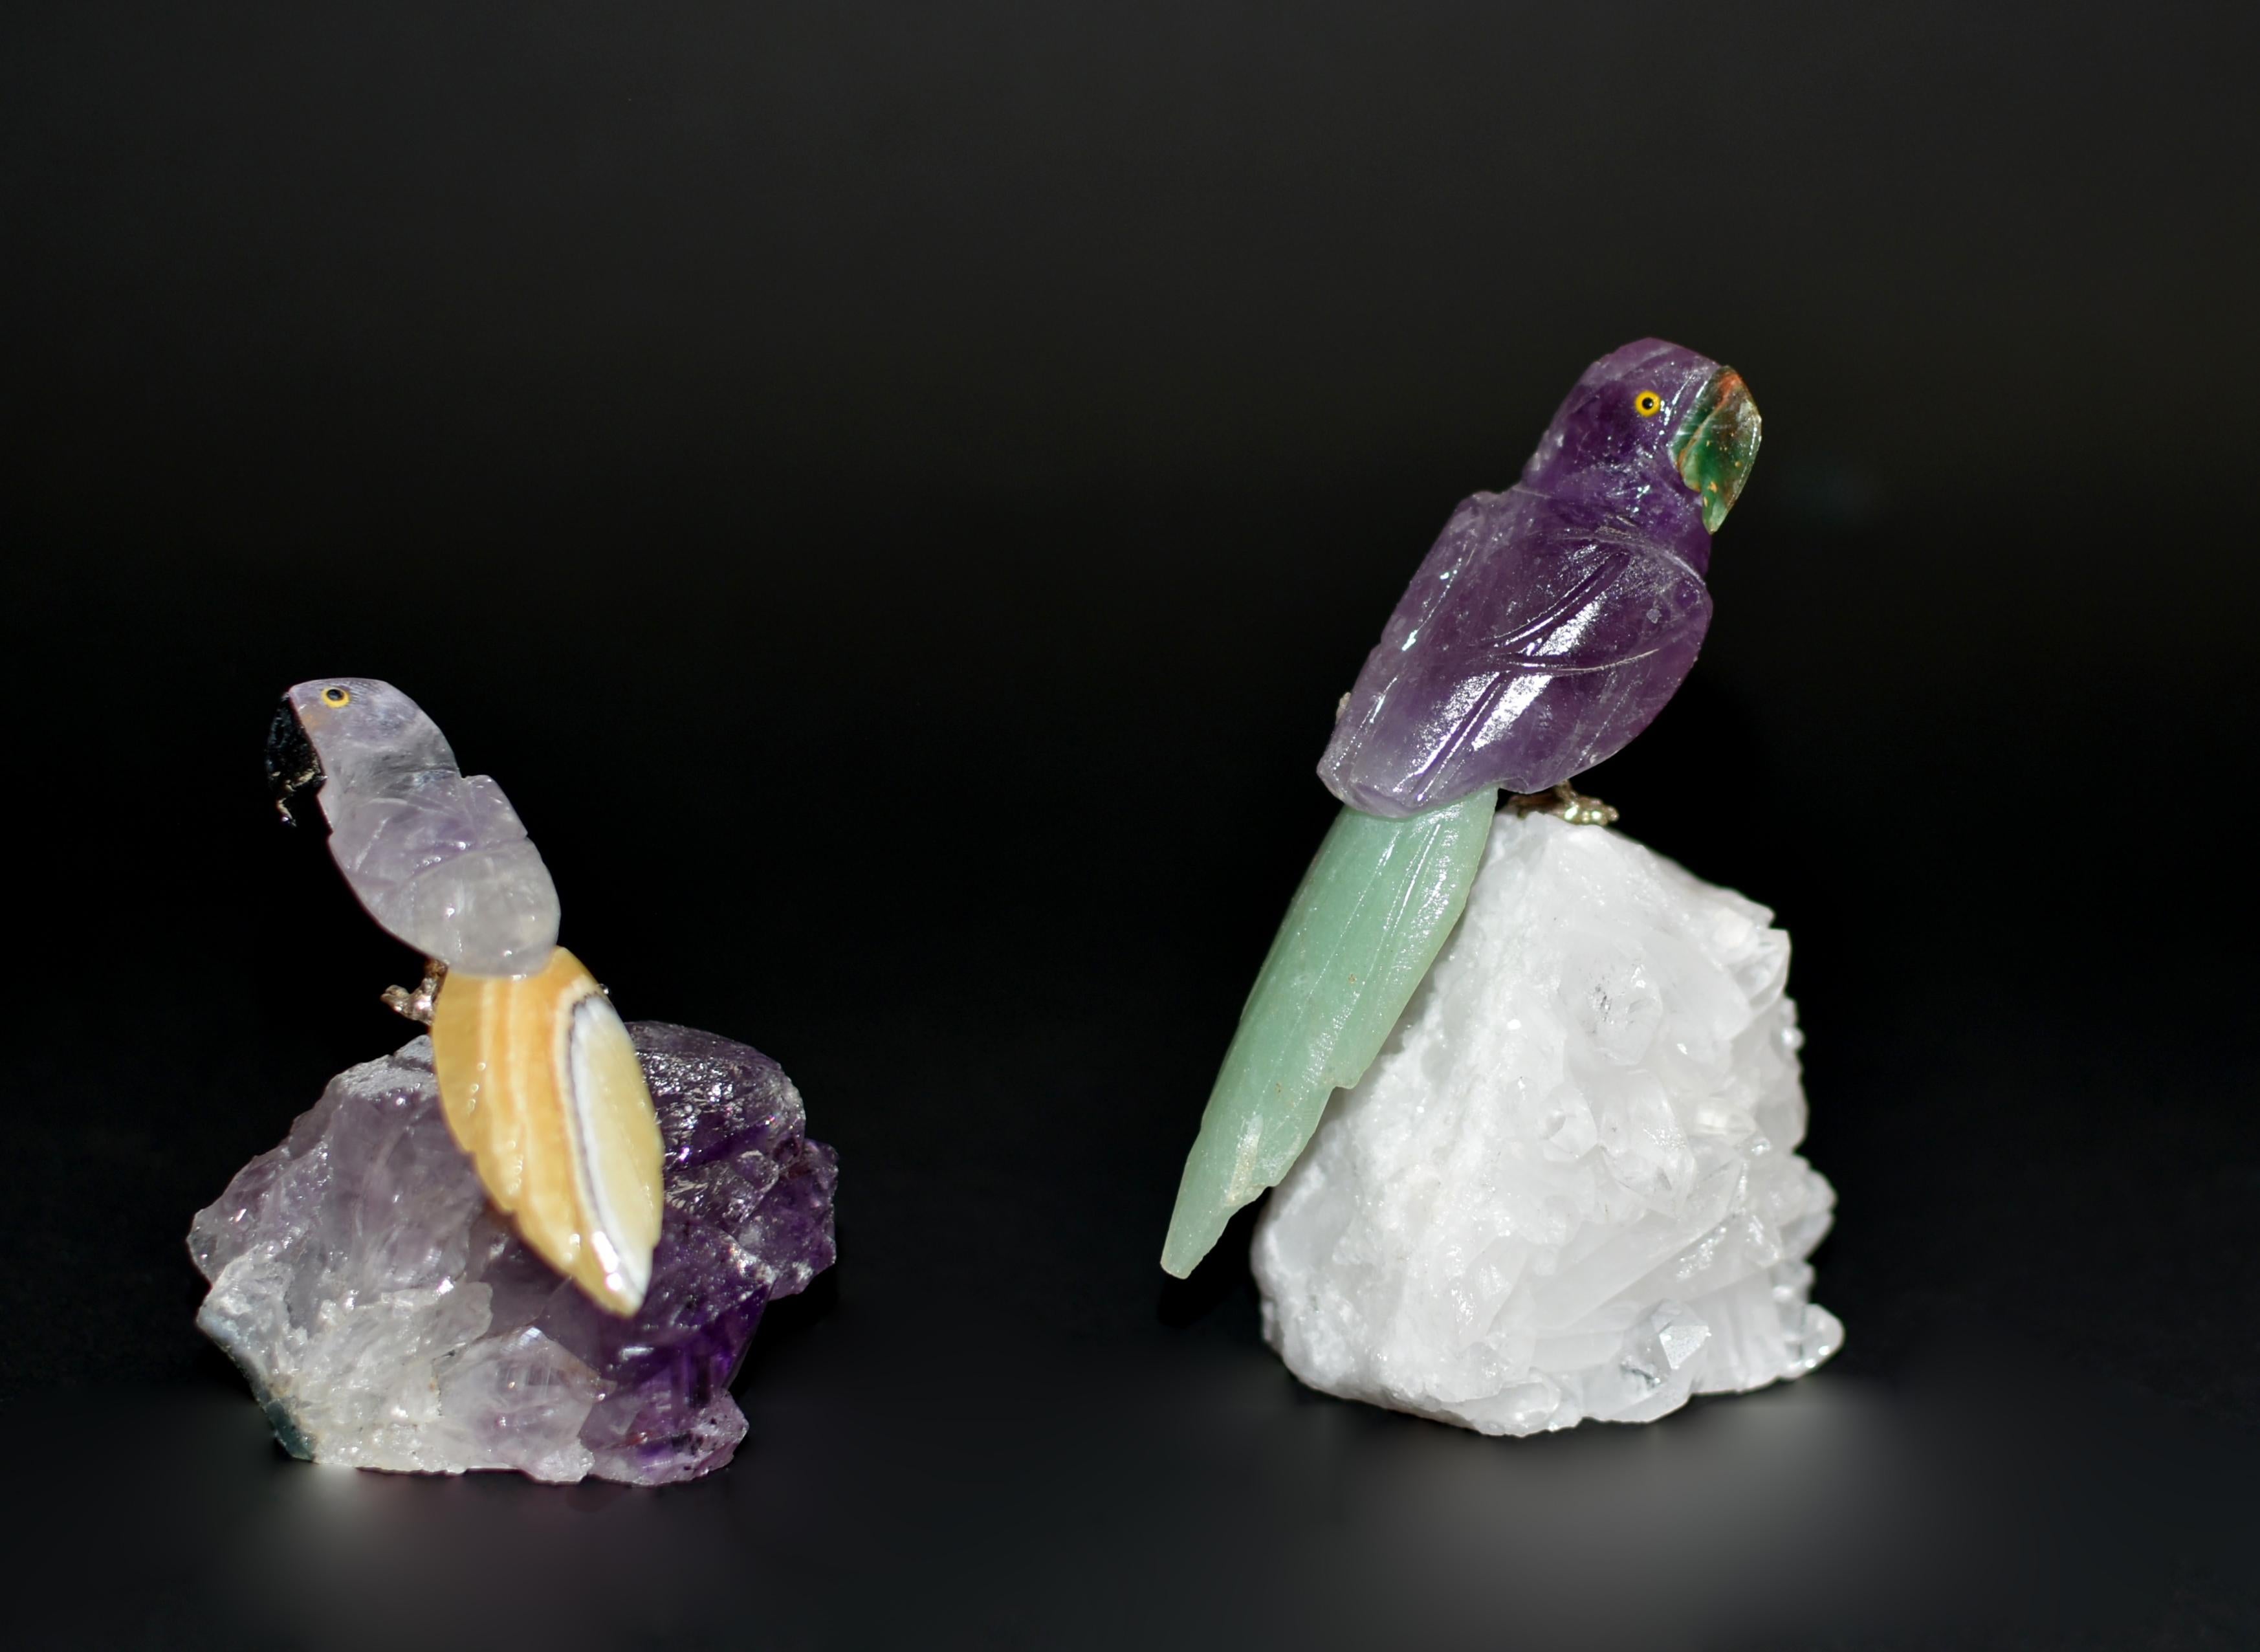 Two amethyst parrots perched on rock crystal and amethyst cluster. Realistically modelled with curious and alert expression, with natural purple amethyst plumage and tail in green aventurine and yellow calcite. Beaks in aventurine and black onyx.